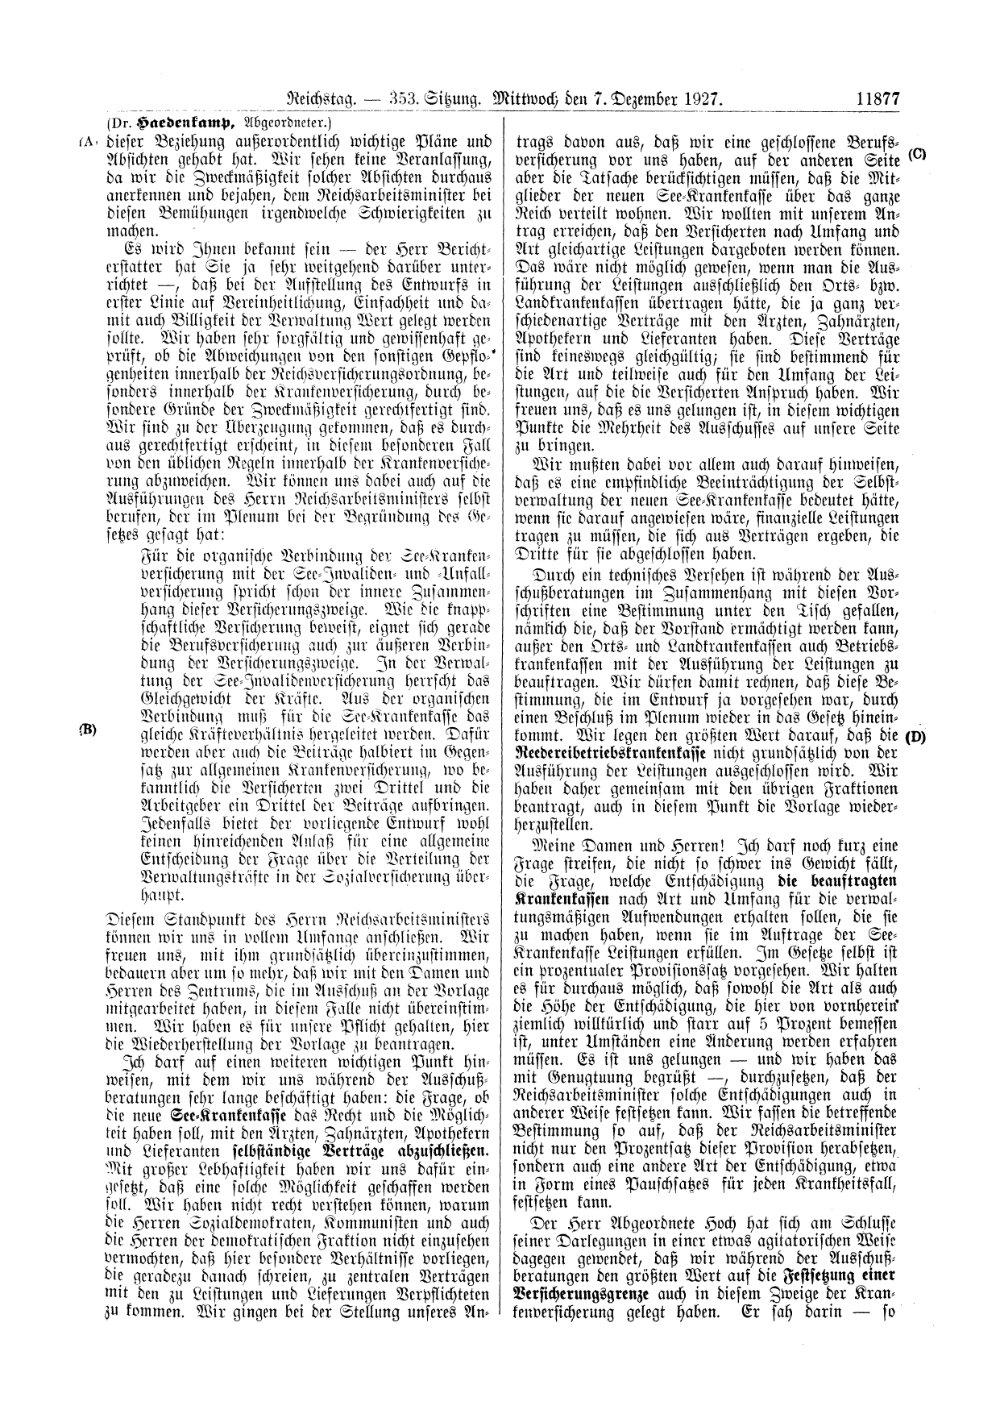 Scan of page 11877